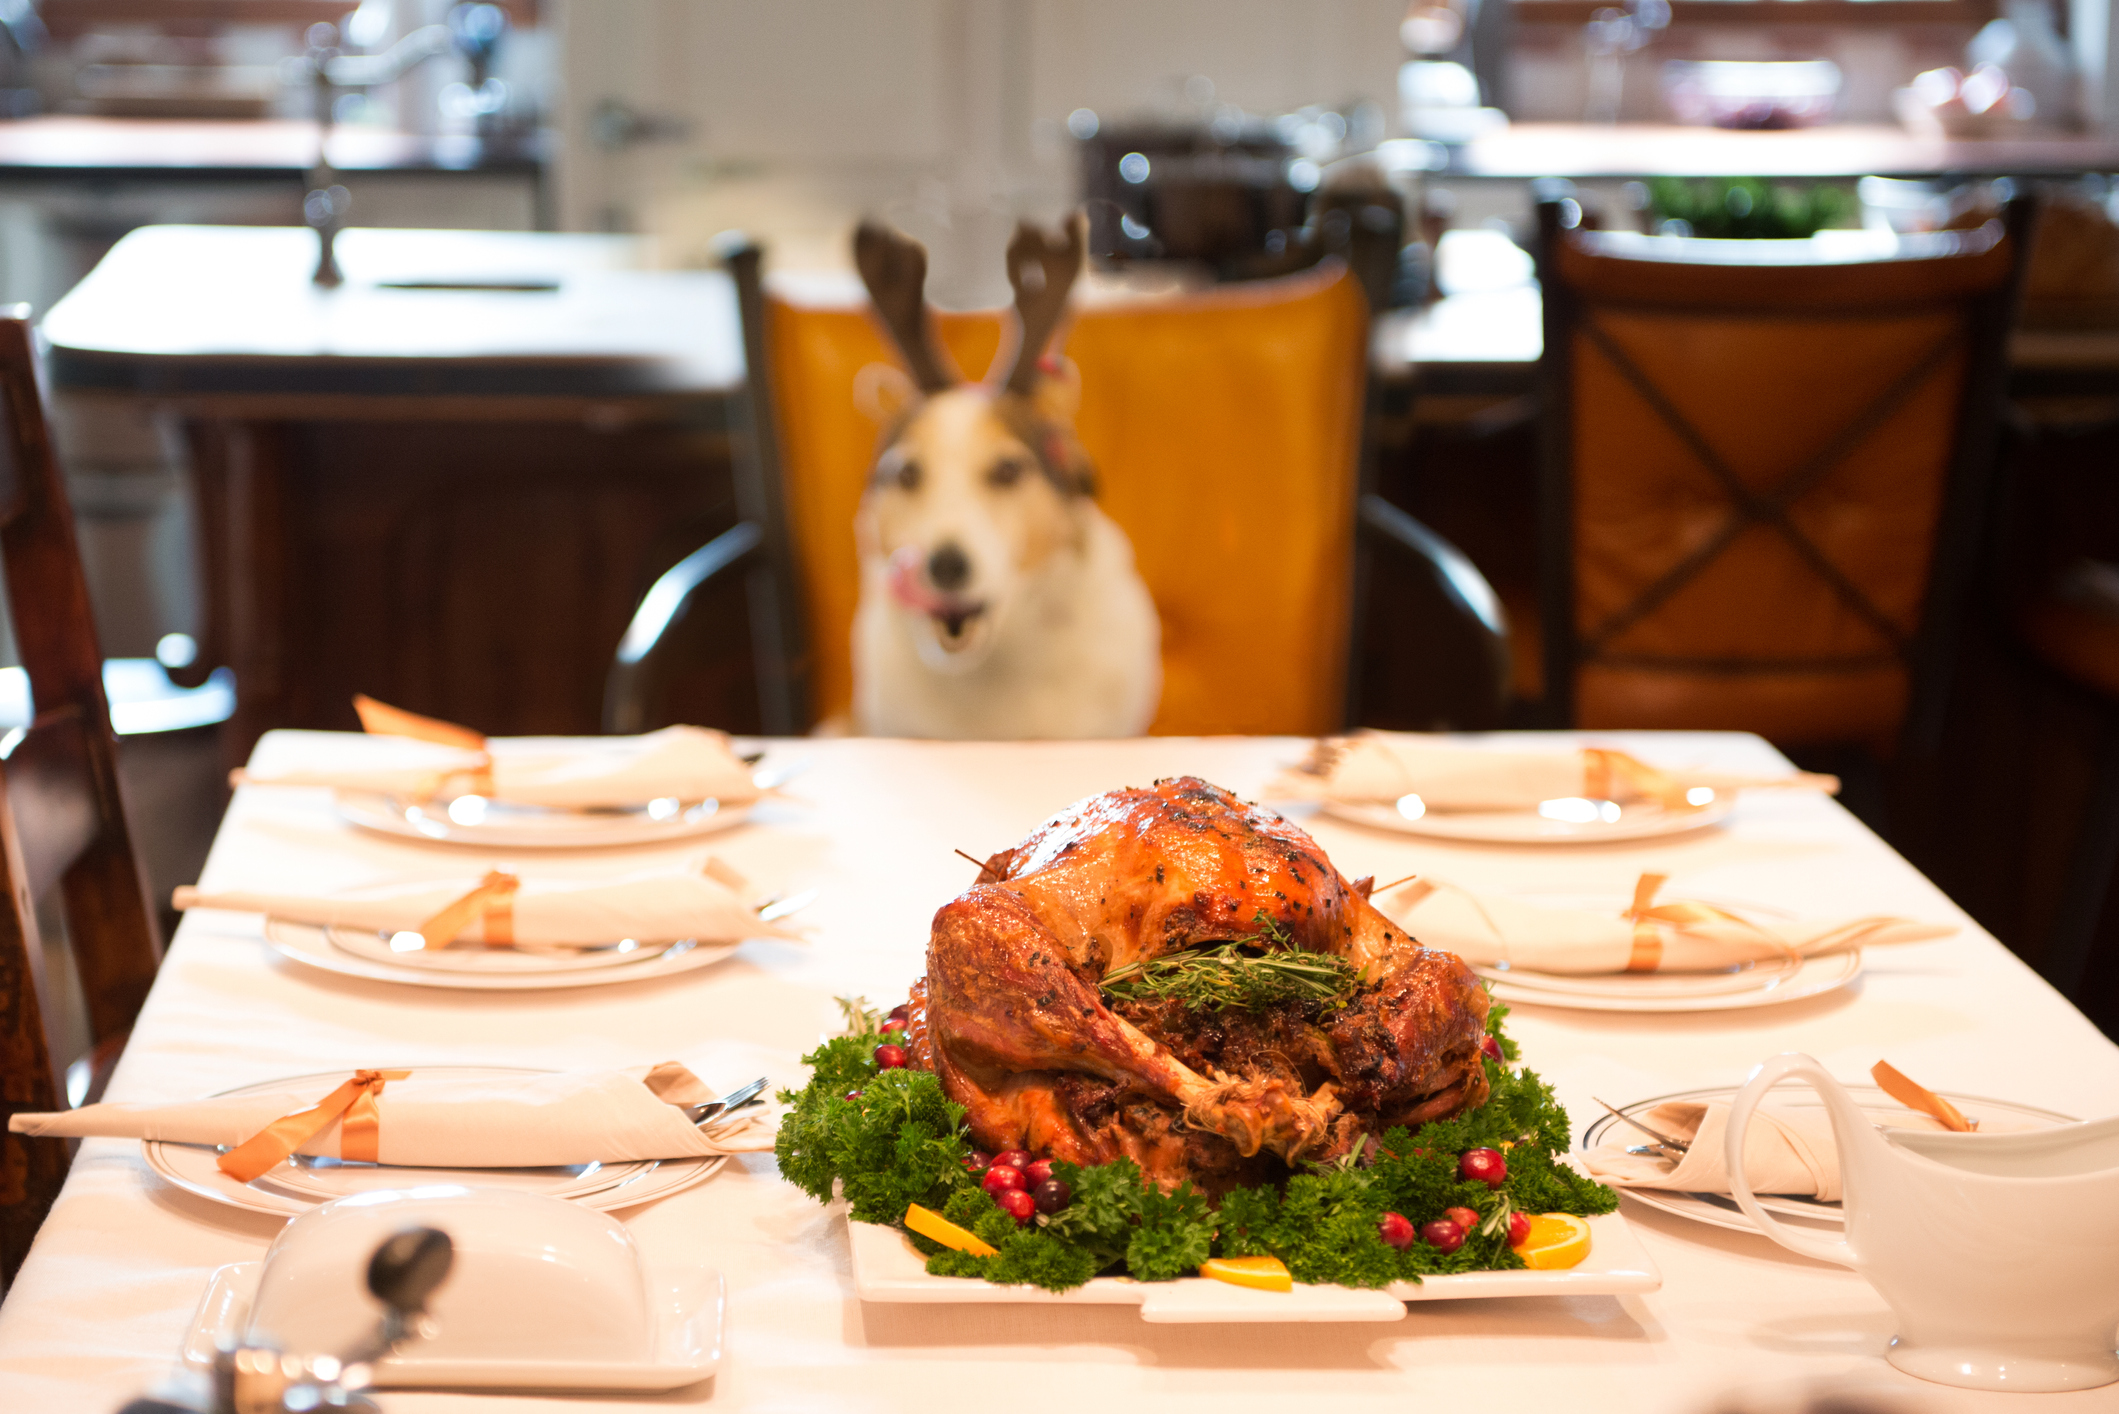 Jack Russel Terrier wearing costume reindeer antlers sit a table in front of roasted turkey. High angle view. Photo was taken in color in Quebec Canada.